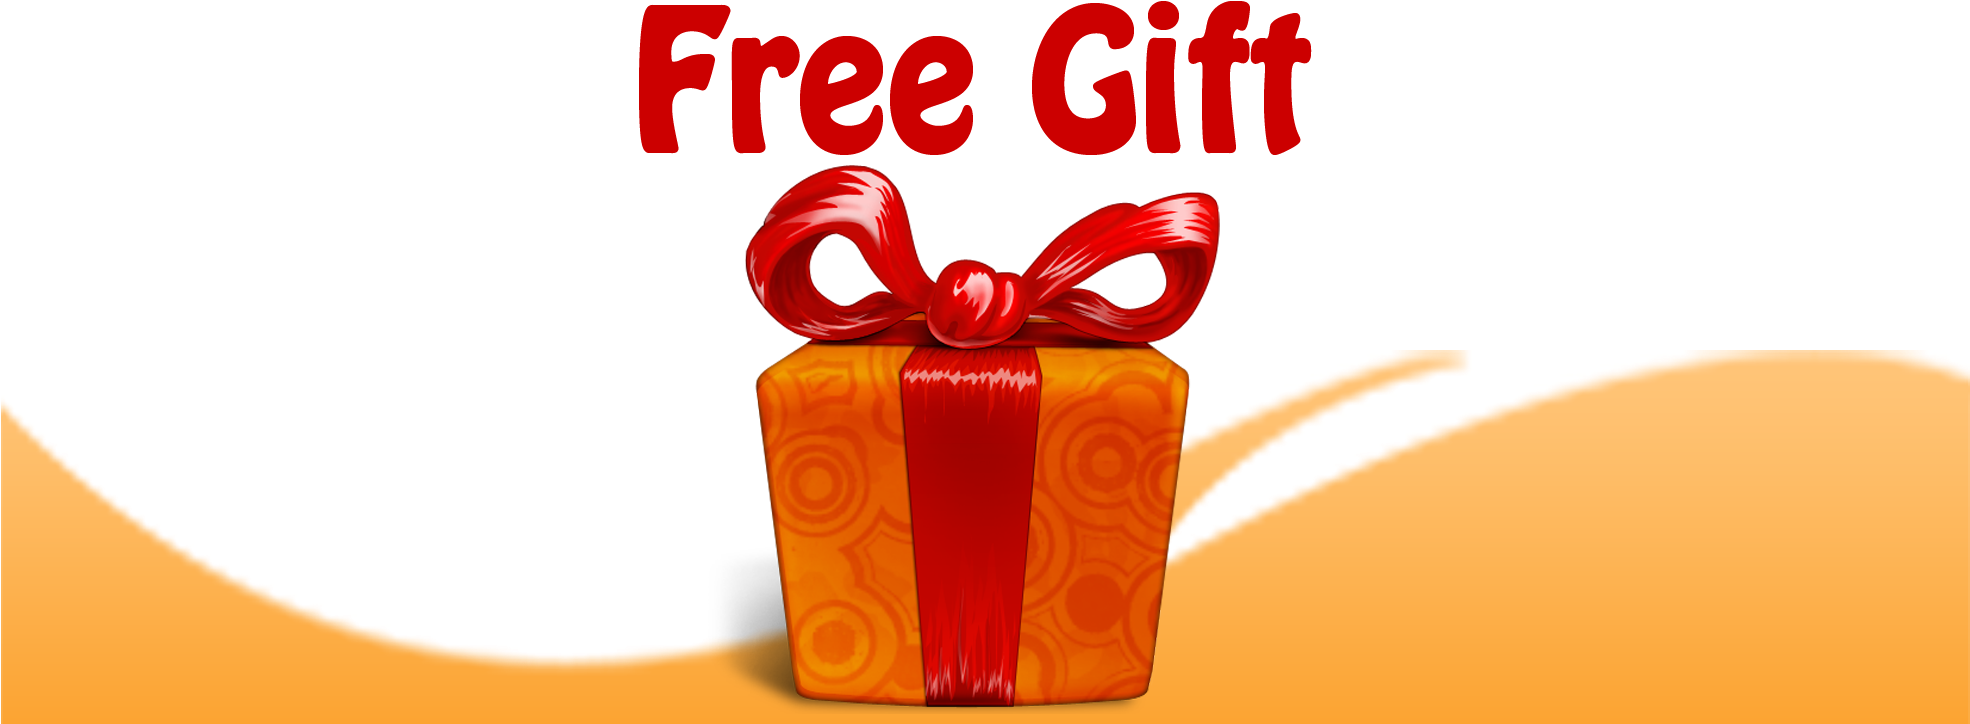 Free Gift - Free Gift For You (1969x787), Png Download